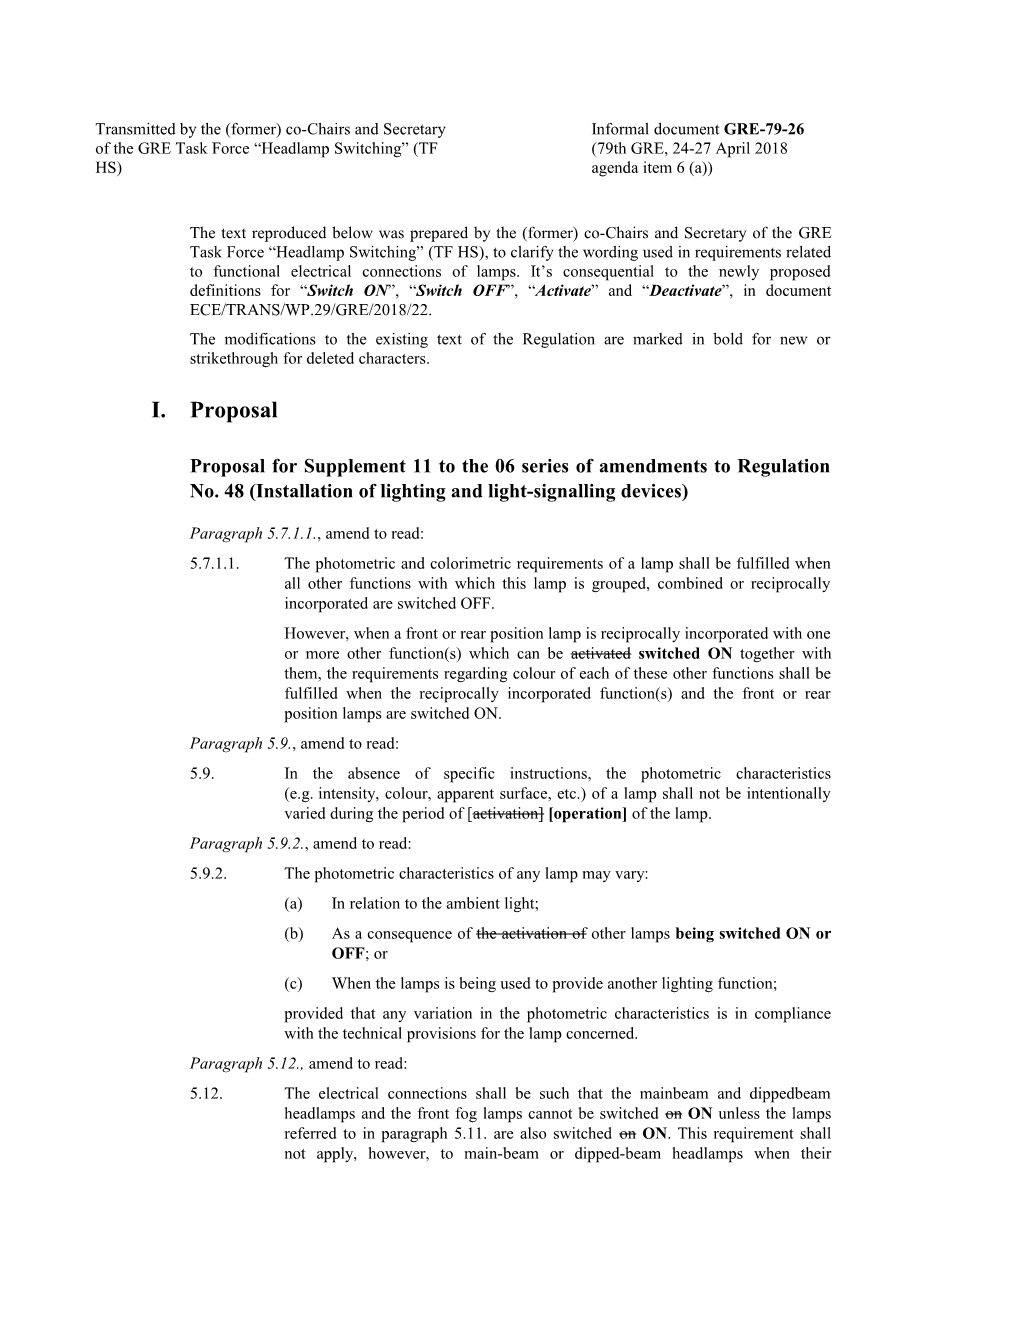 Proposal for Supplement 11 to the 06 Series of Amendments to Regulation No. 48 (Installation